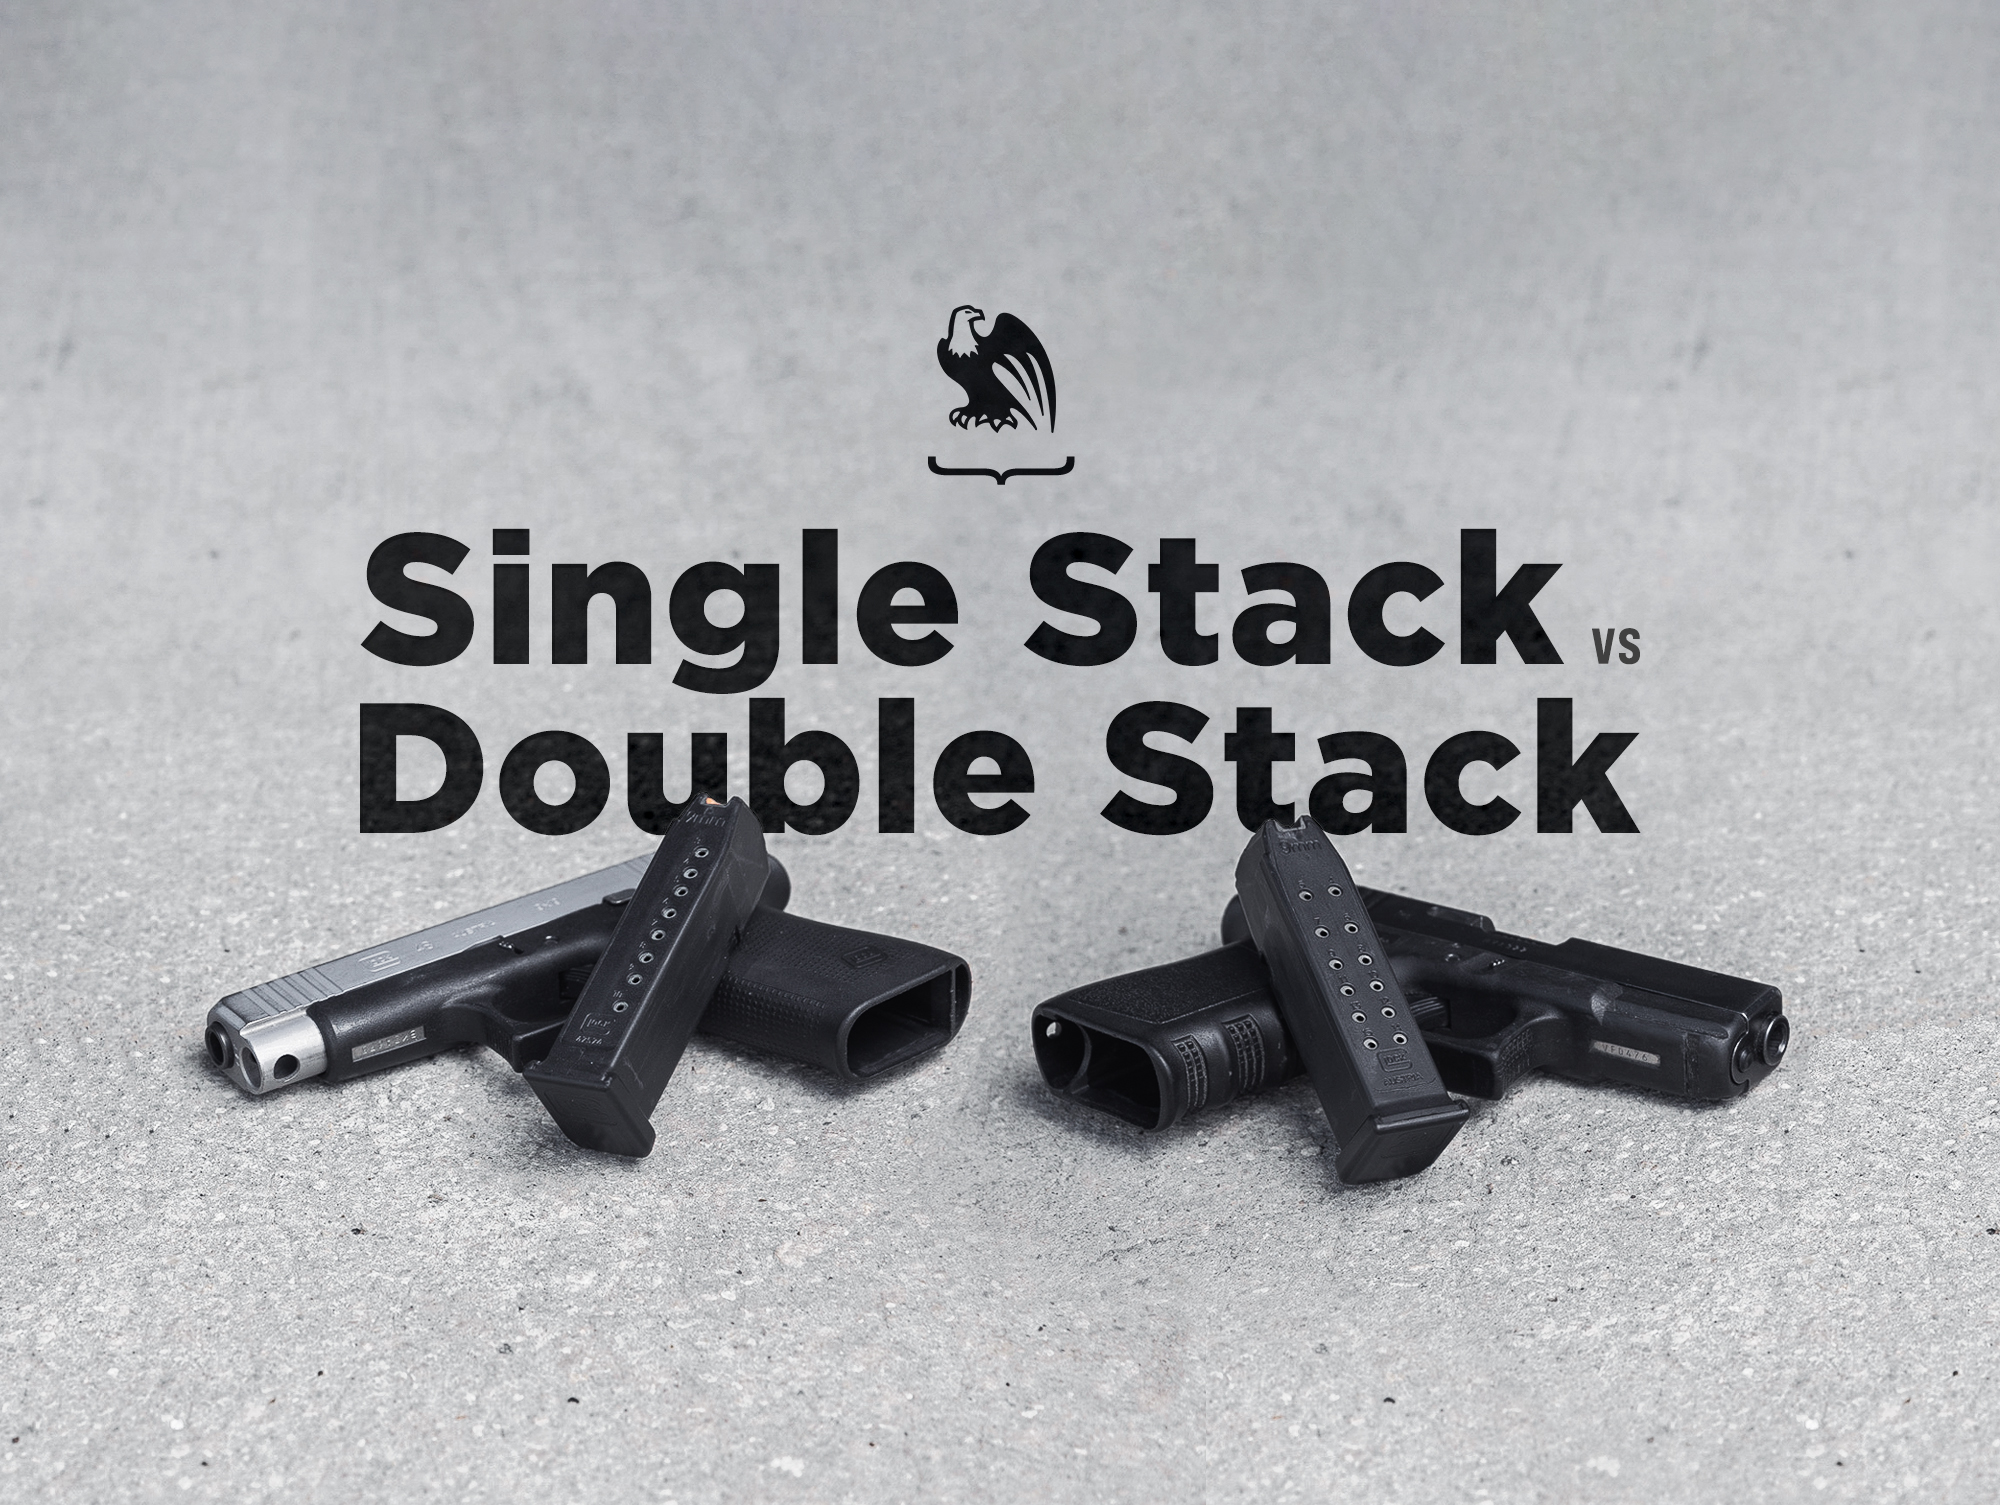 Would it be physically possible to have a double stack single feed